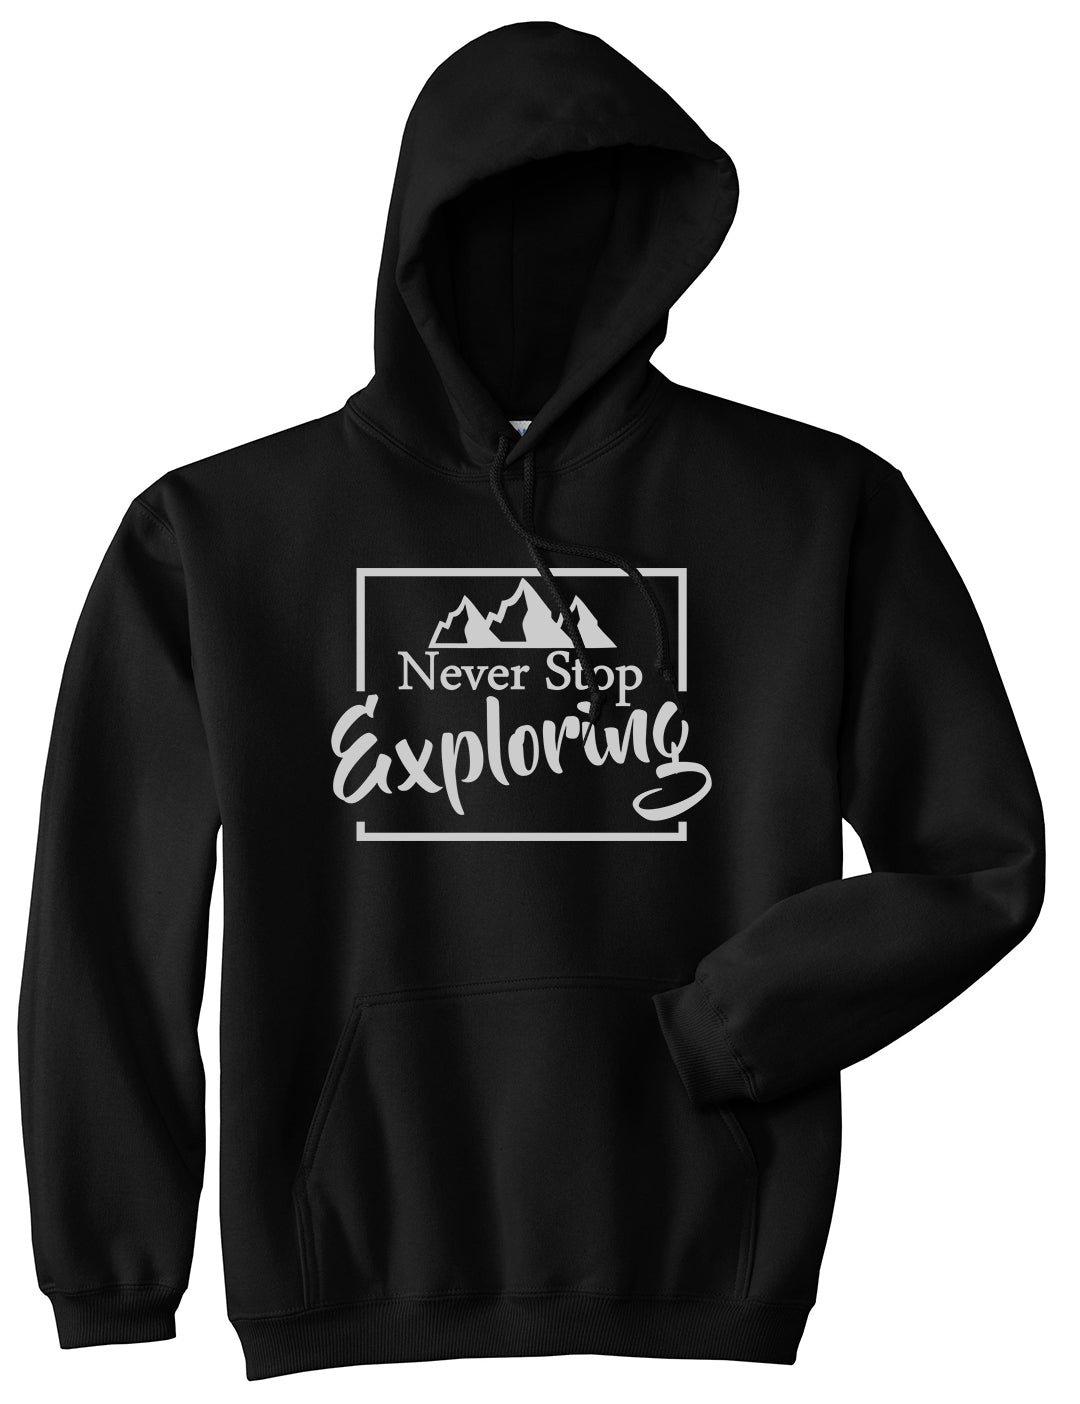 Never Stop Exploring Mens Black Pullover Hoodie by KINGS OF NY